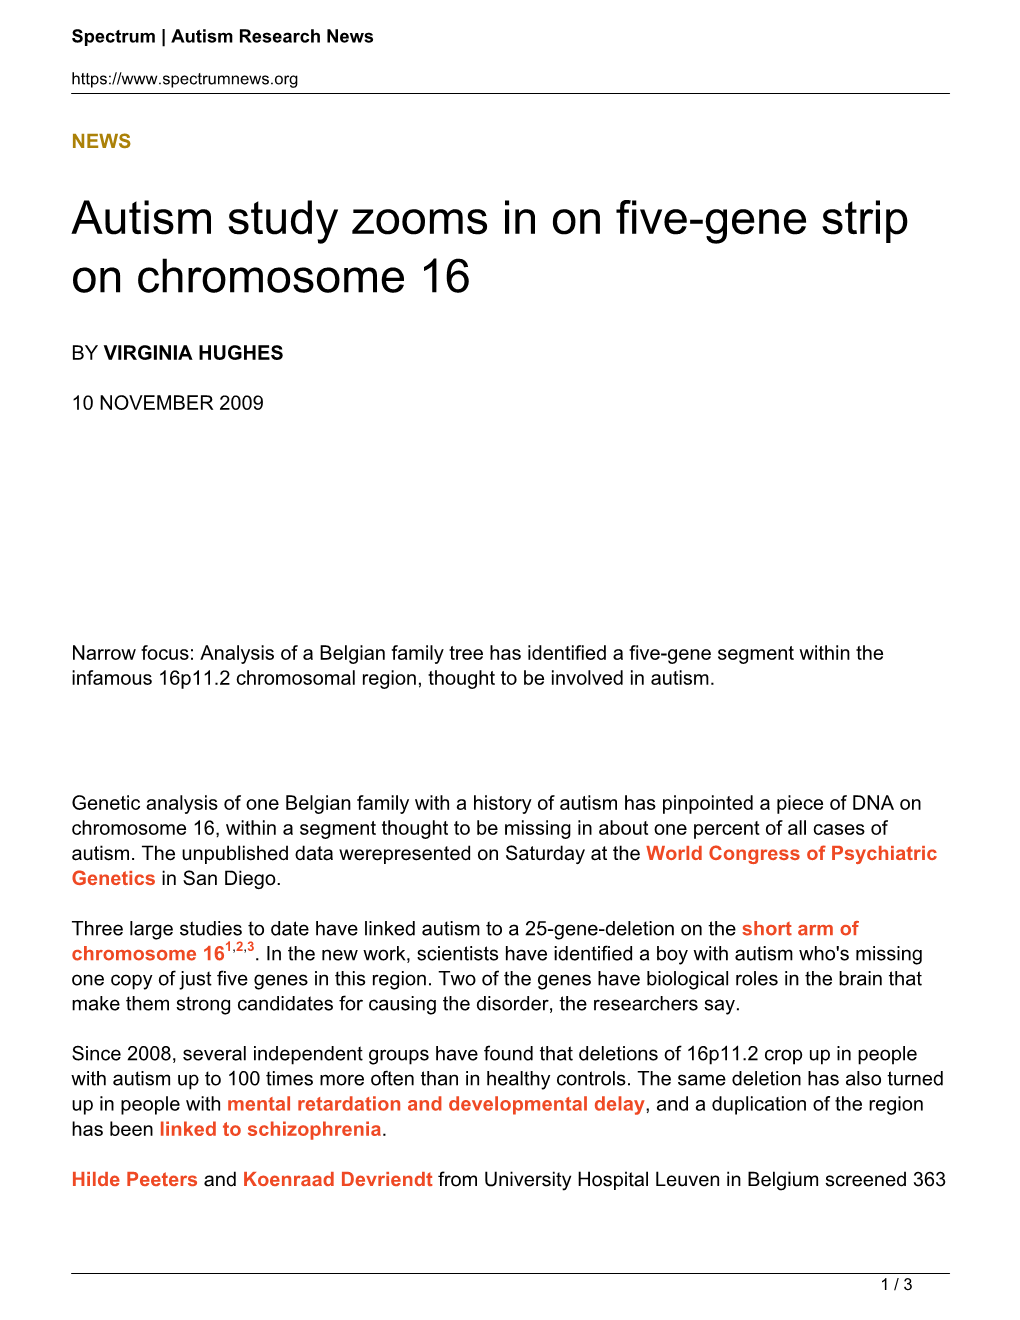 Autism Study Zooms in on Five-Gene Strip on Chromosome 16